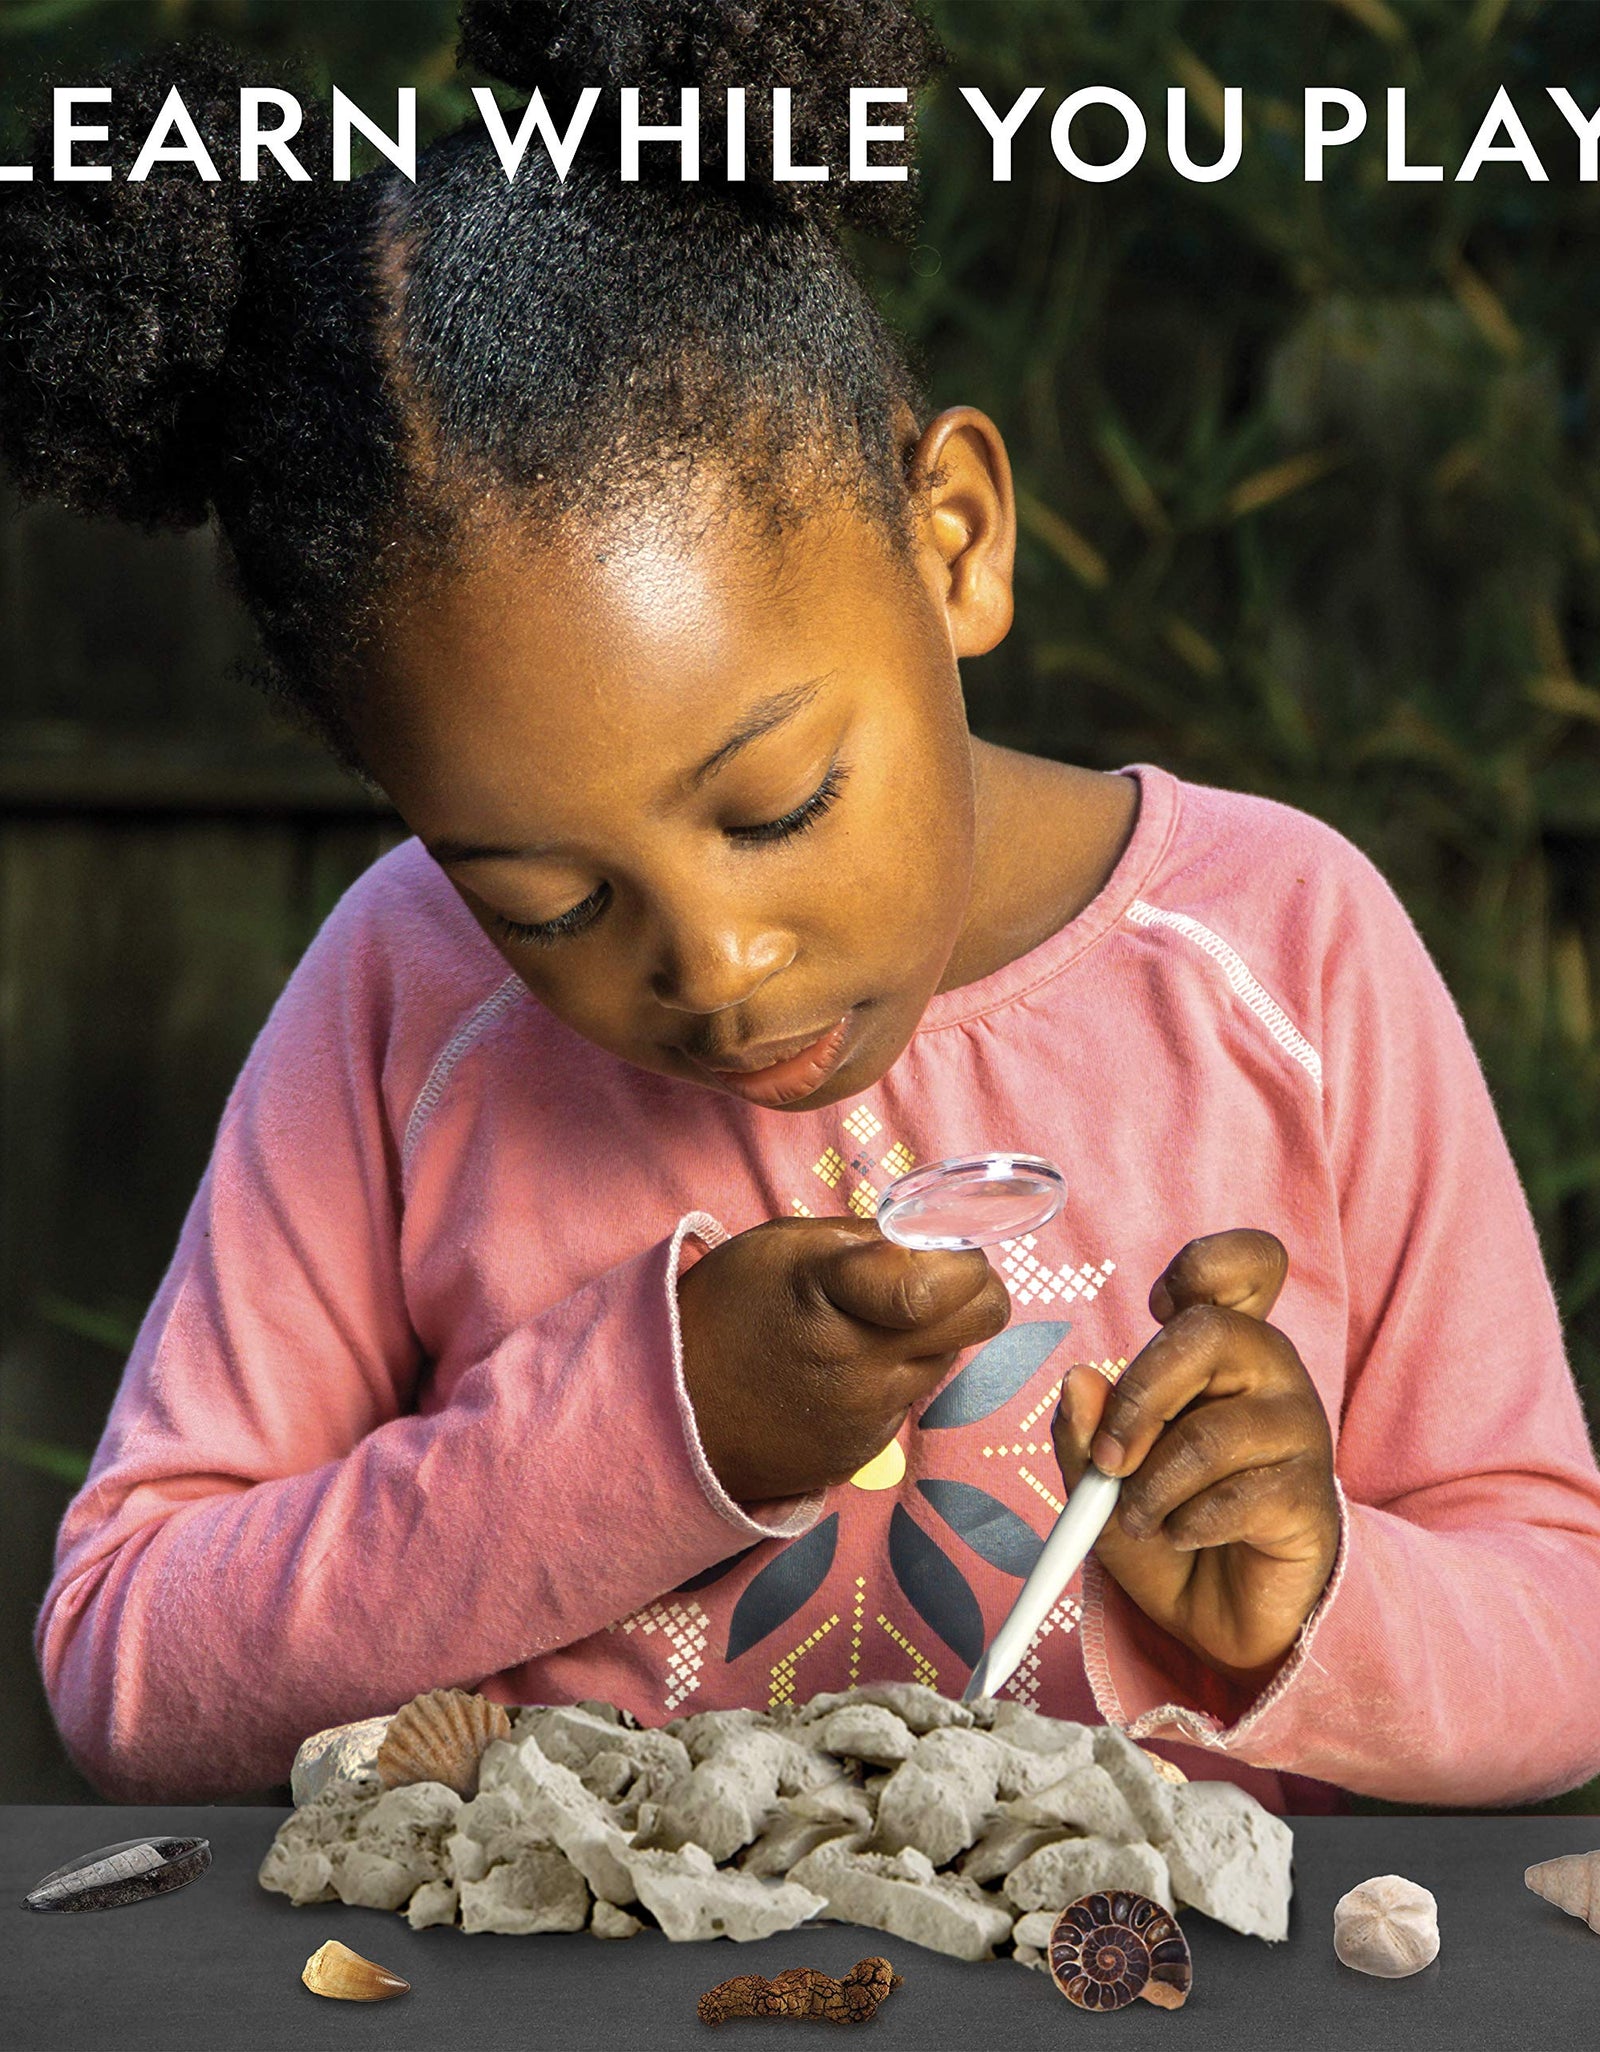 NATIONAL GEOGRAPHIC Mega Fossil Dig Kit – Excavate 15 Real Fossils Including Dinosaur Bones & Shark Teeth, Educational Toys, Great Gift for Girls and Boys, an AMAZON EXCLUSIVE Science Kit